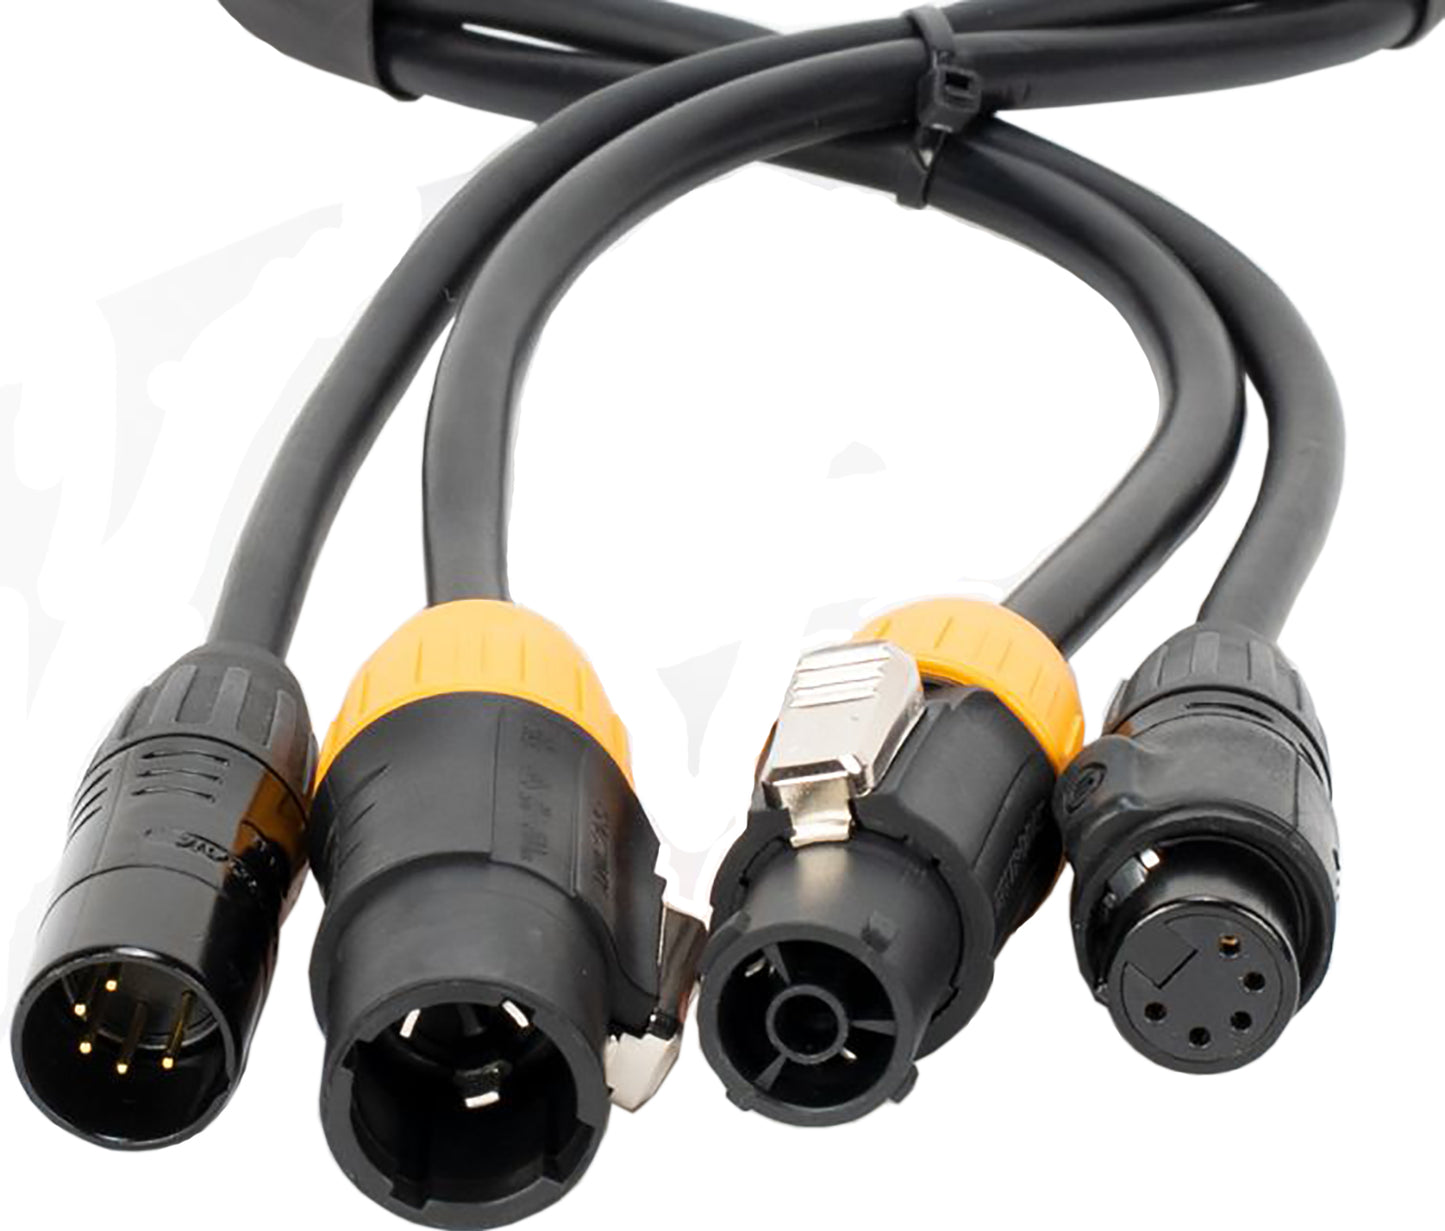 Accu-Cable AC5PTRUE25 25-Foot 5-Pin XLR IP65 Water Resistant DMX Cable - PSSL ProSound and Stage Lighting